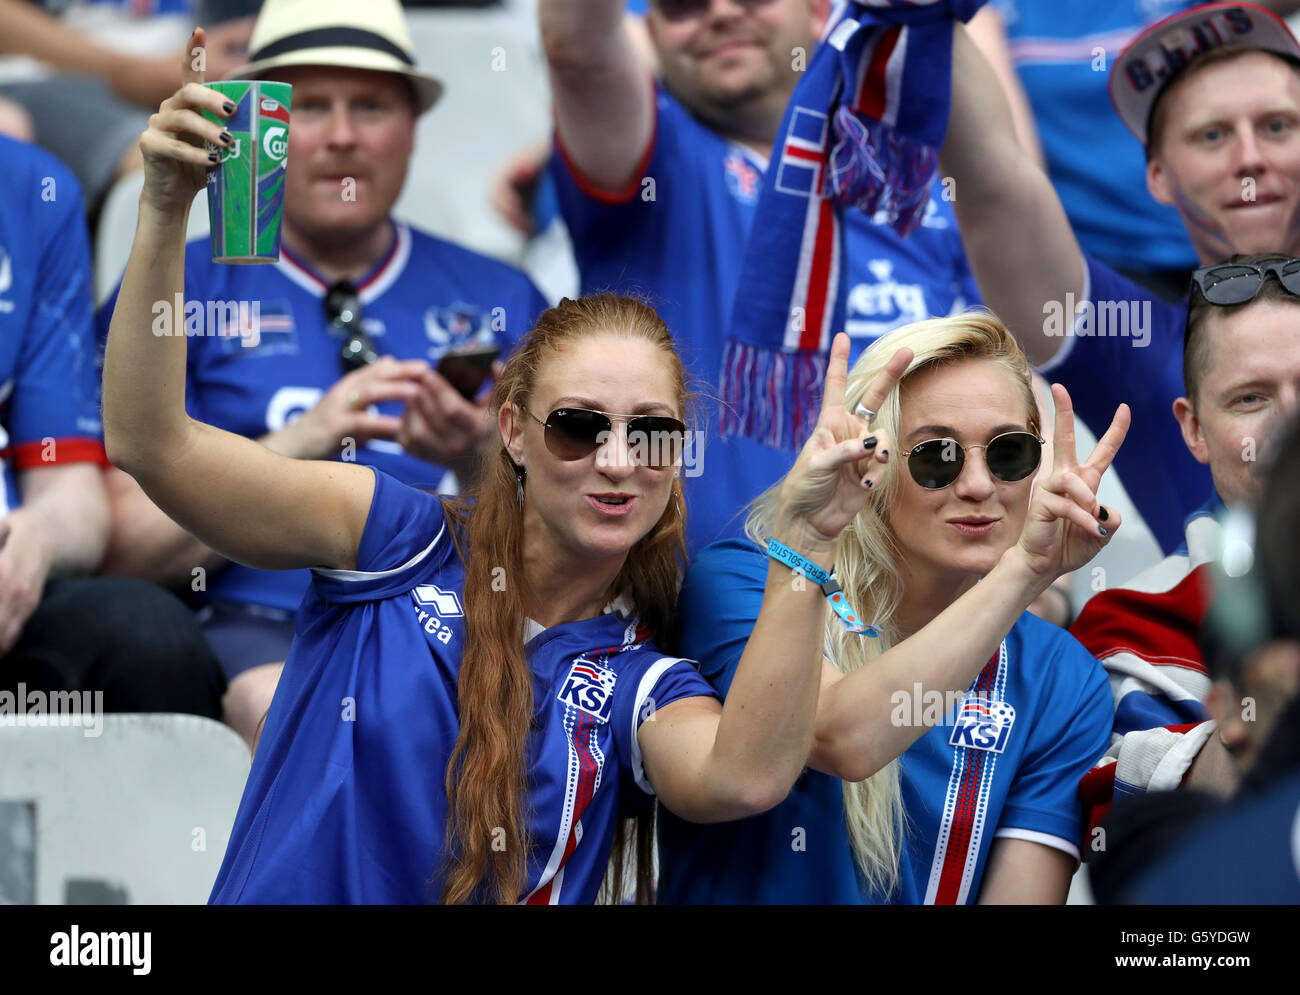 Iceland fans cheer on their side in the stands before the Euro 2016, Group F match at the Stade de France, Paris. Stock Photo